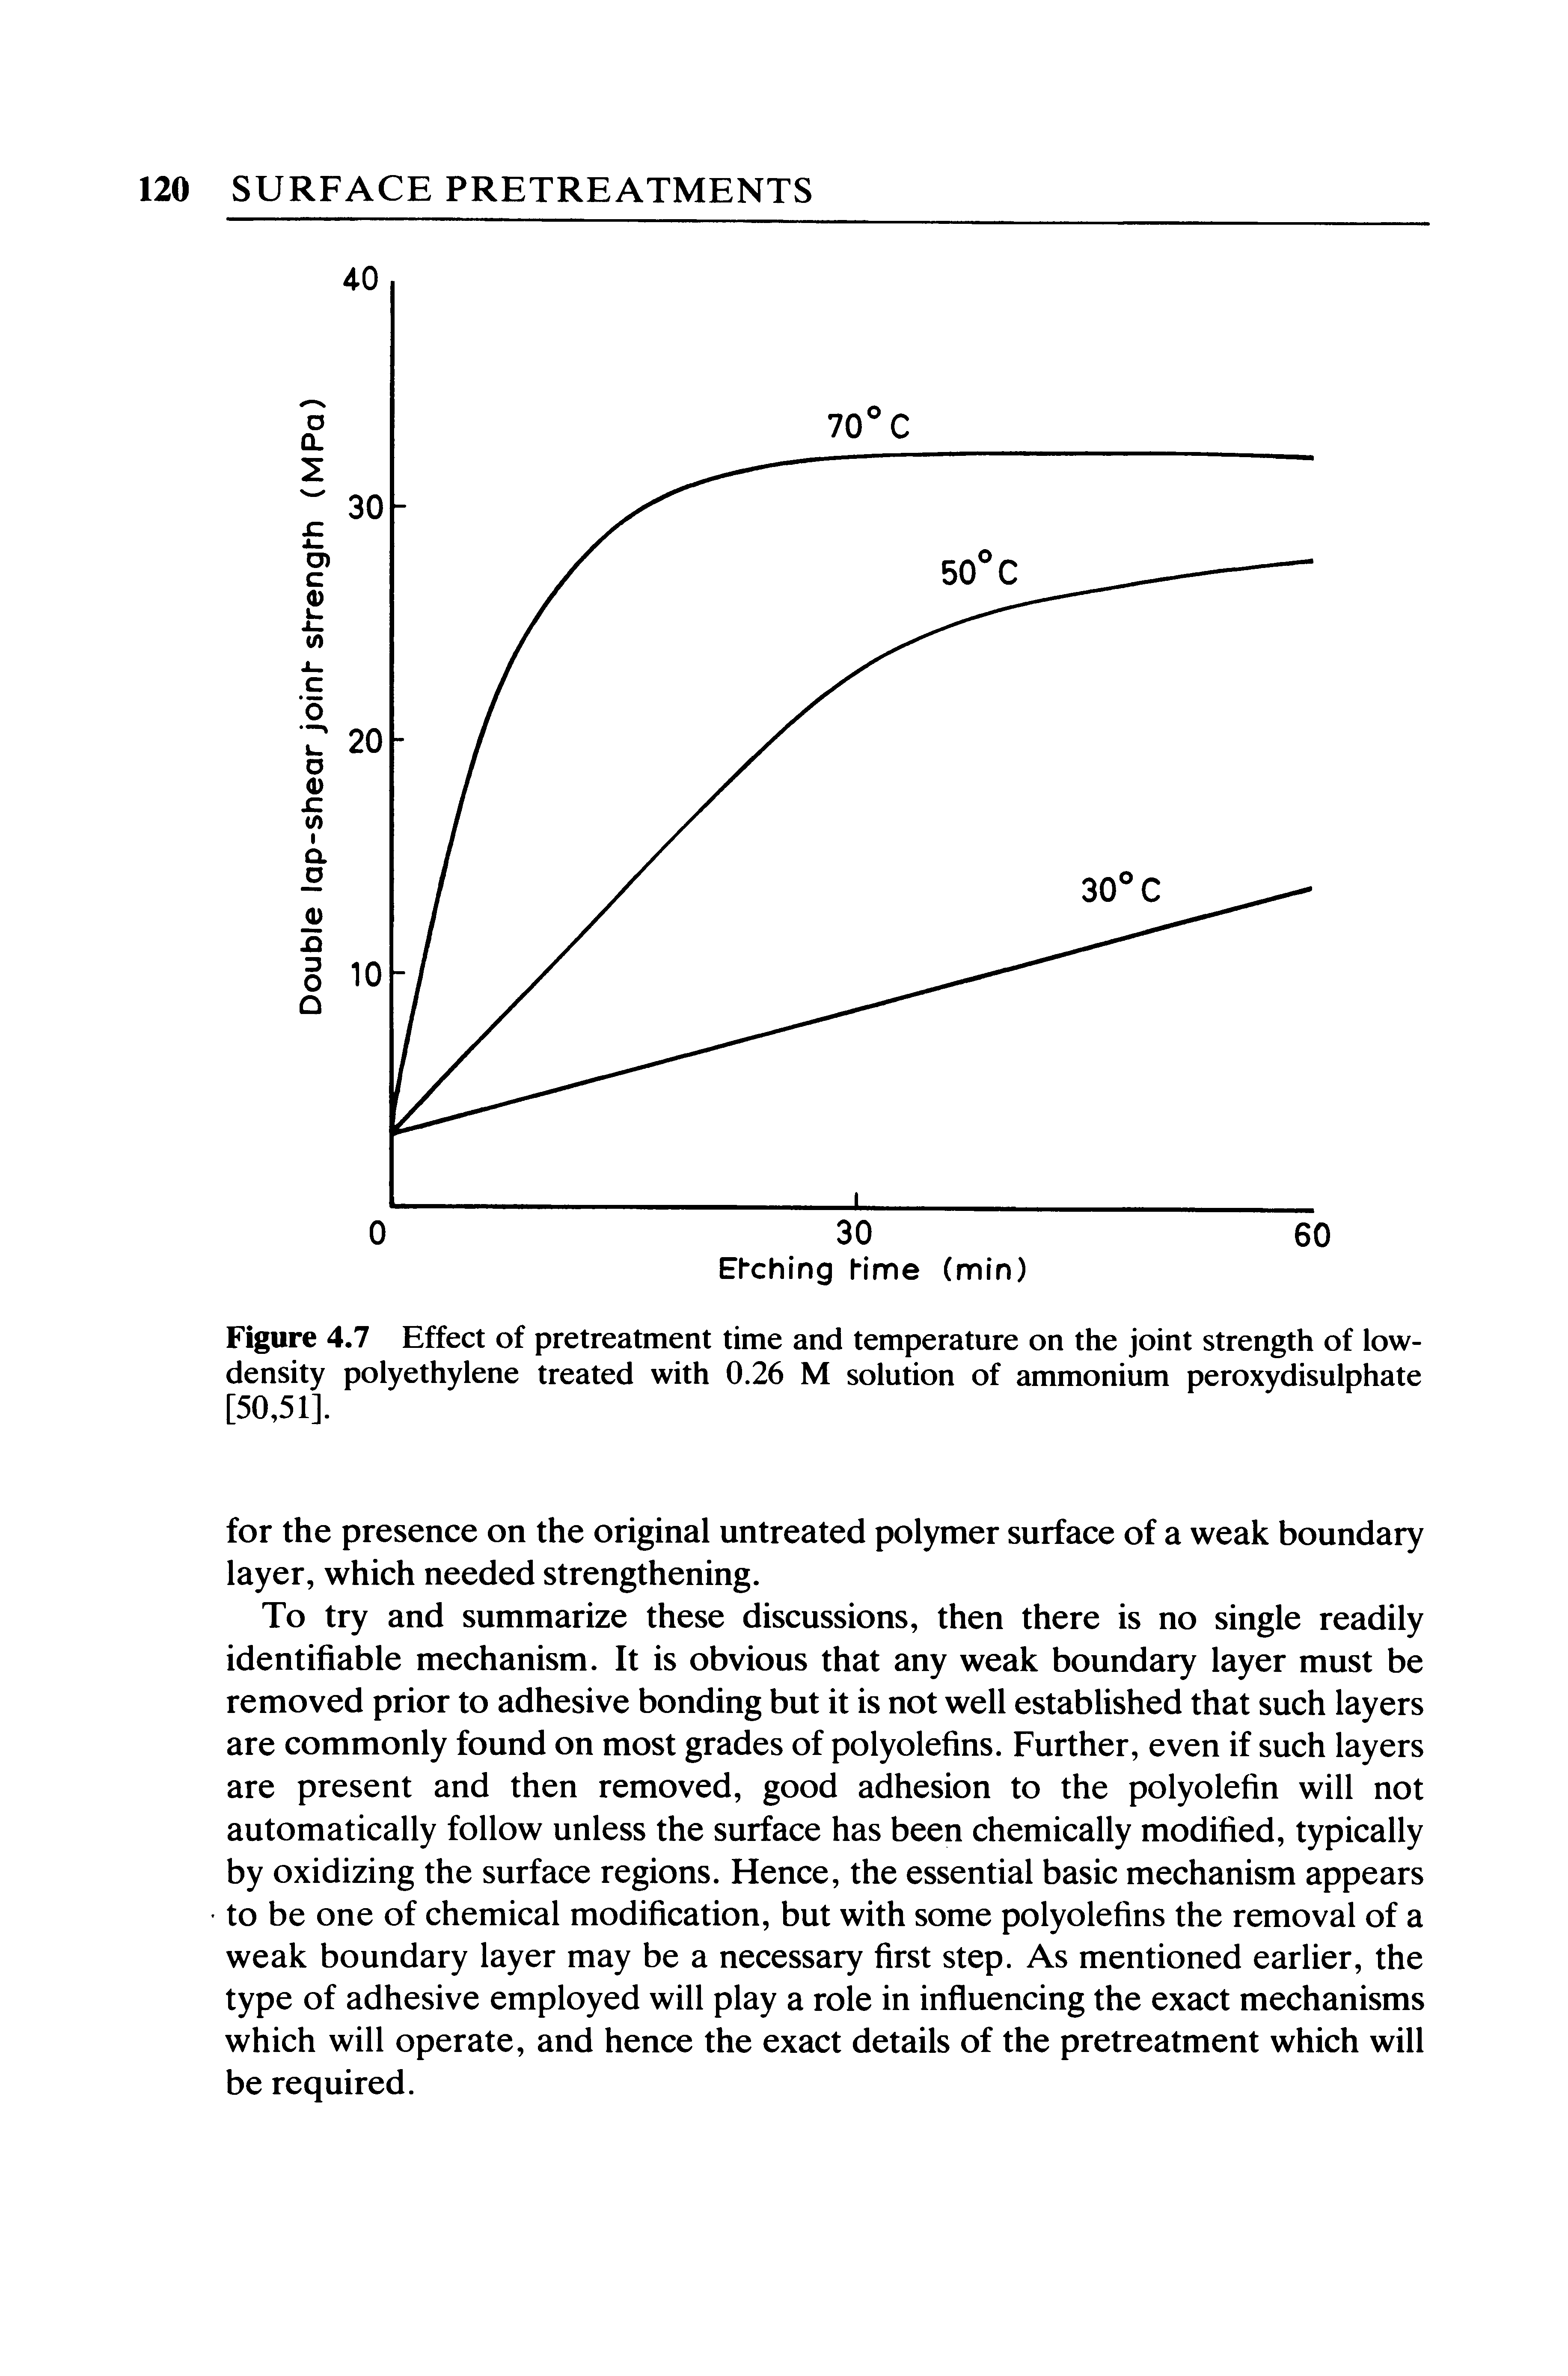 Figure 4.7 Effect of pretreatment time and temperature on the joint strength of low-density polyethylene treated with 0.26 M solution of ammonium peroxydisulphate [50,51].